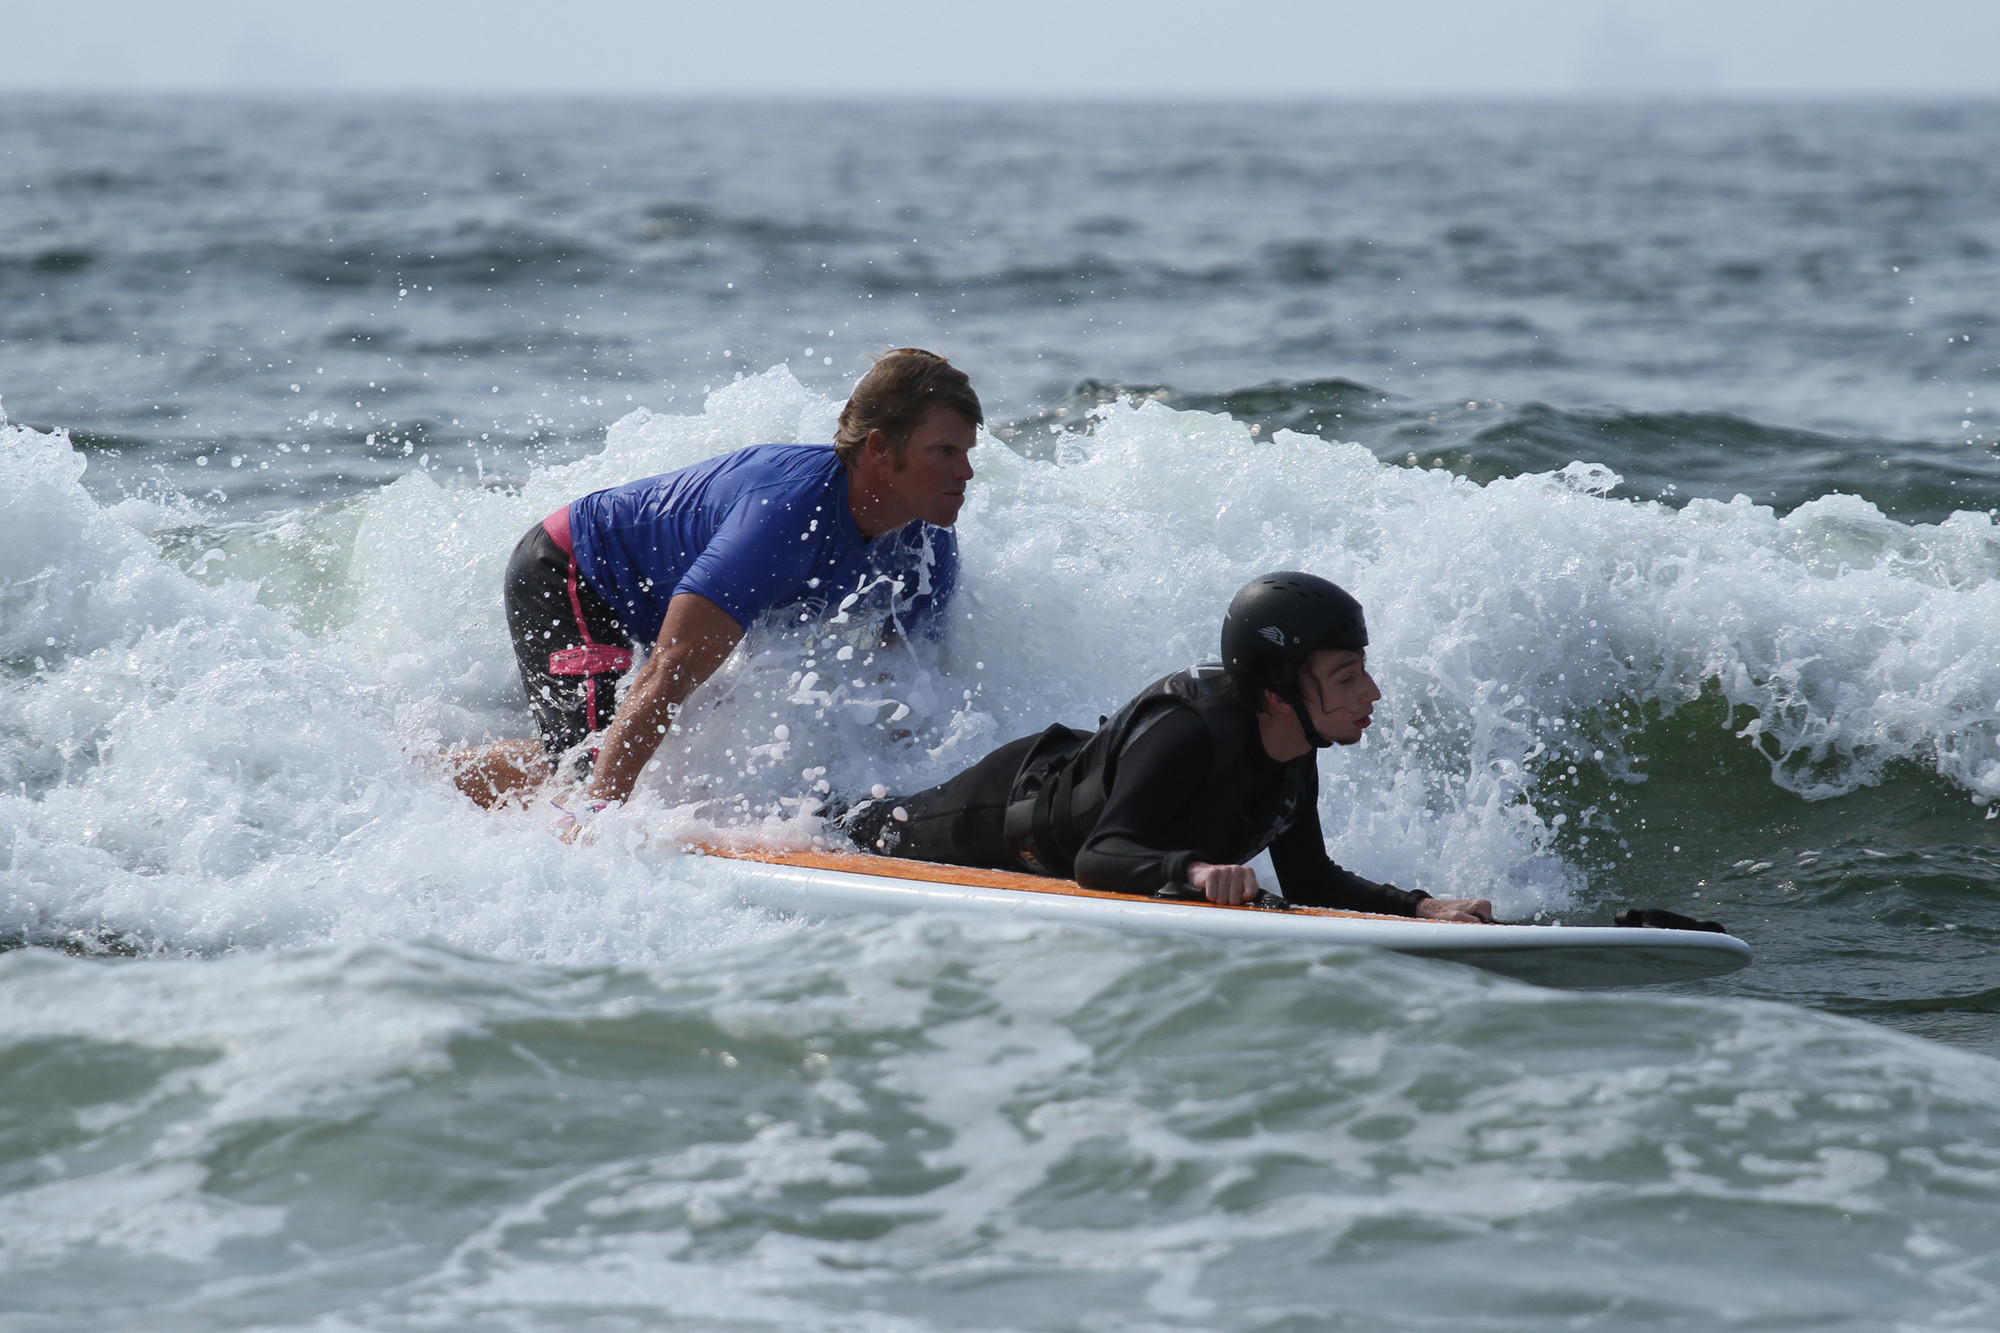 Cliff Skudin of Surf For All situates himself on the back of the board when he paddles into the water with Dylan Hronec, an adaptive surfer from Bellmore, eventually sending him into the waves alone.